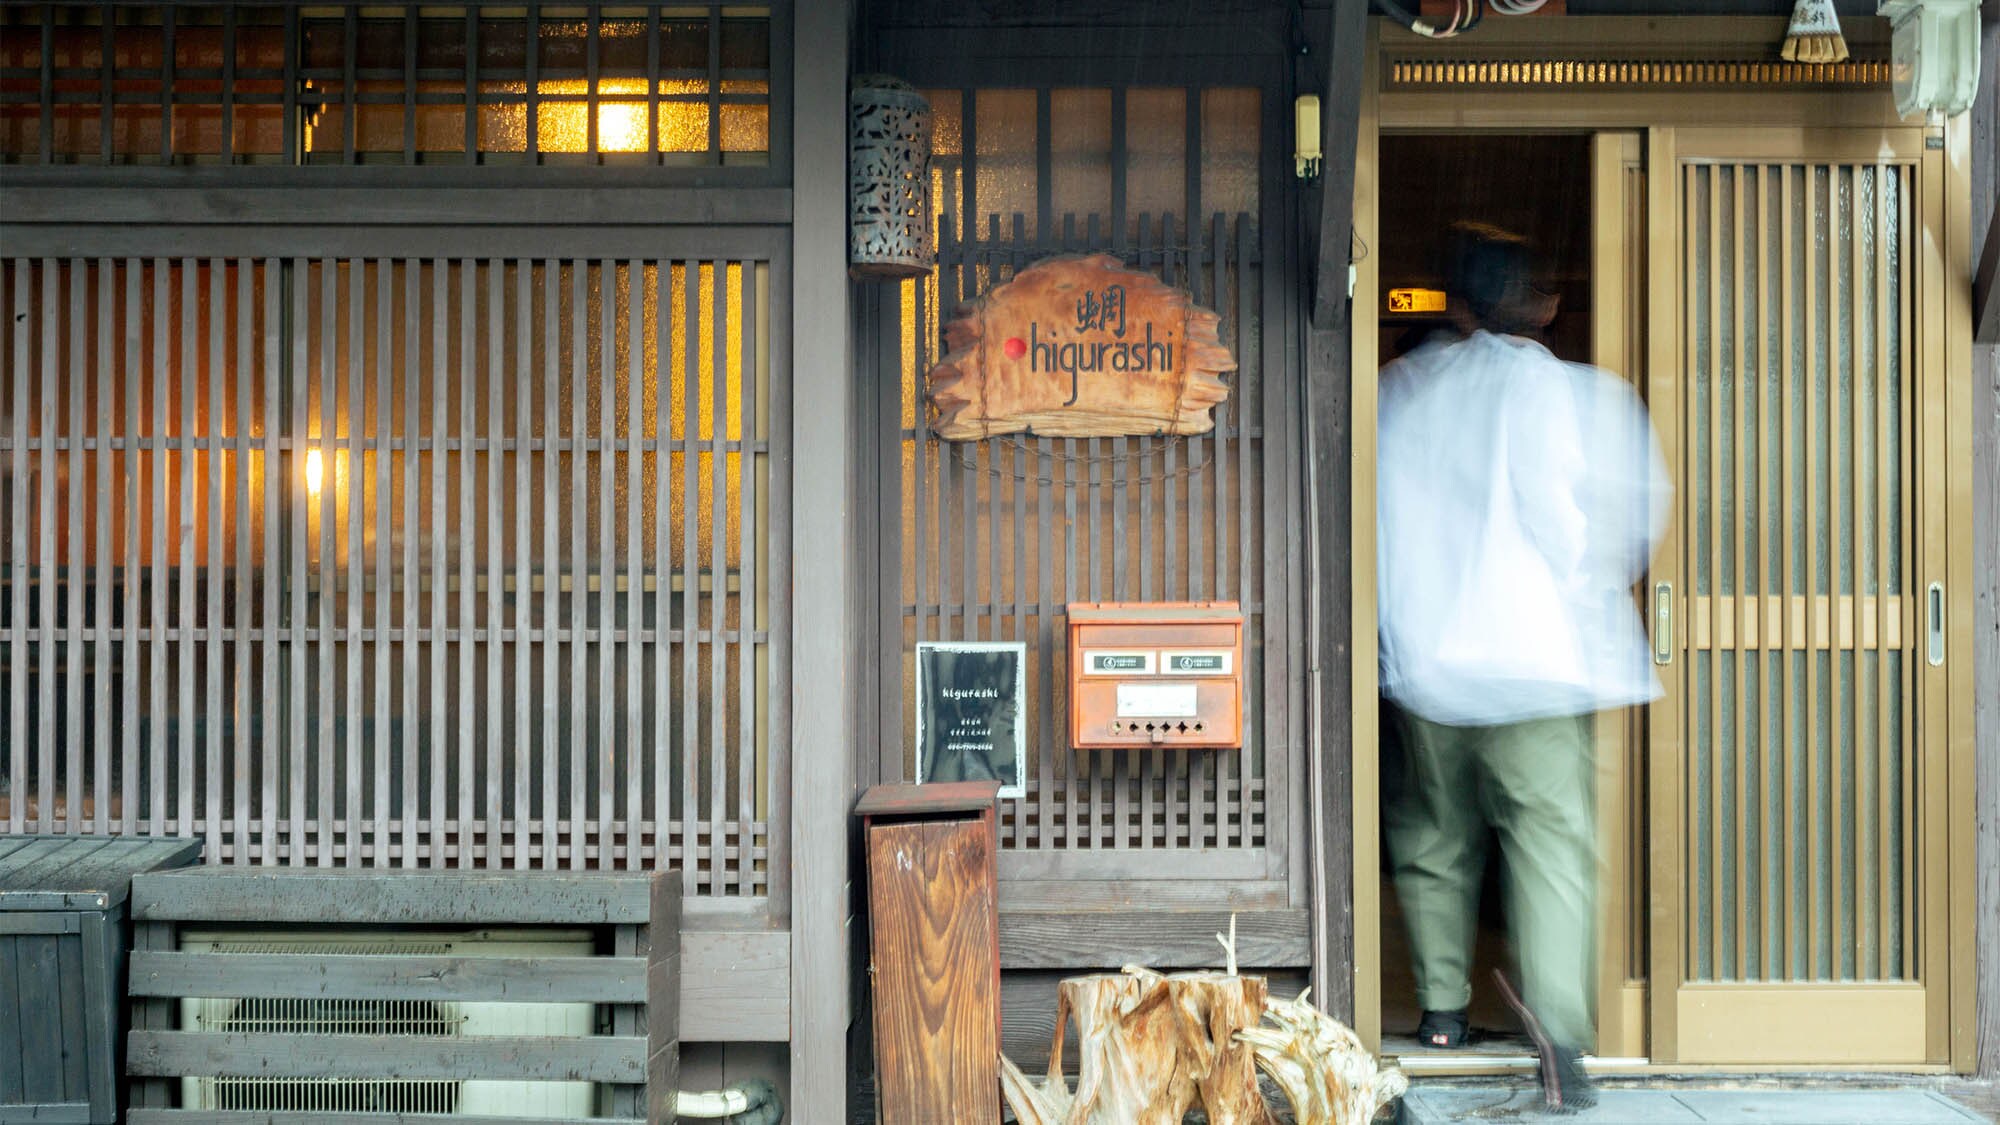 ・Birth in a quiet area, a 100-year-old Kyomachiya renovated into a modern space